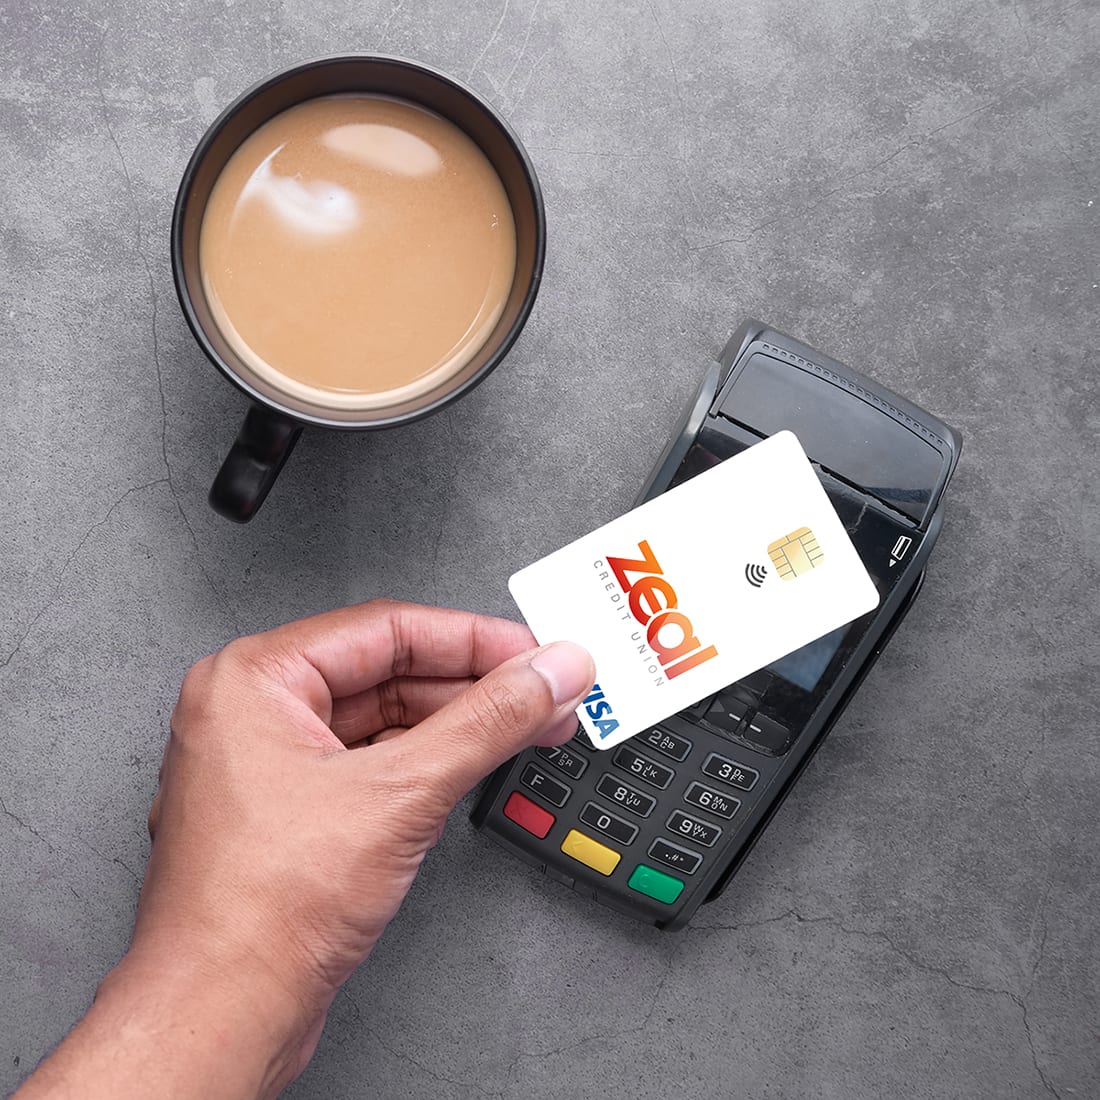 Zeal Tap to Pay. Hand holding Zeal credit card over wireless payment system.